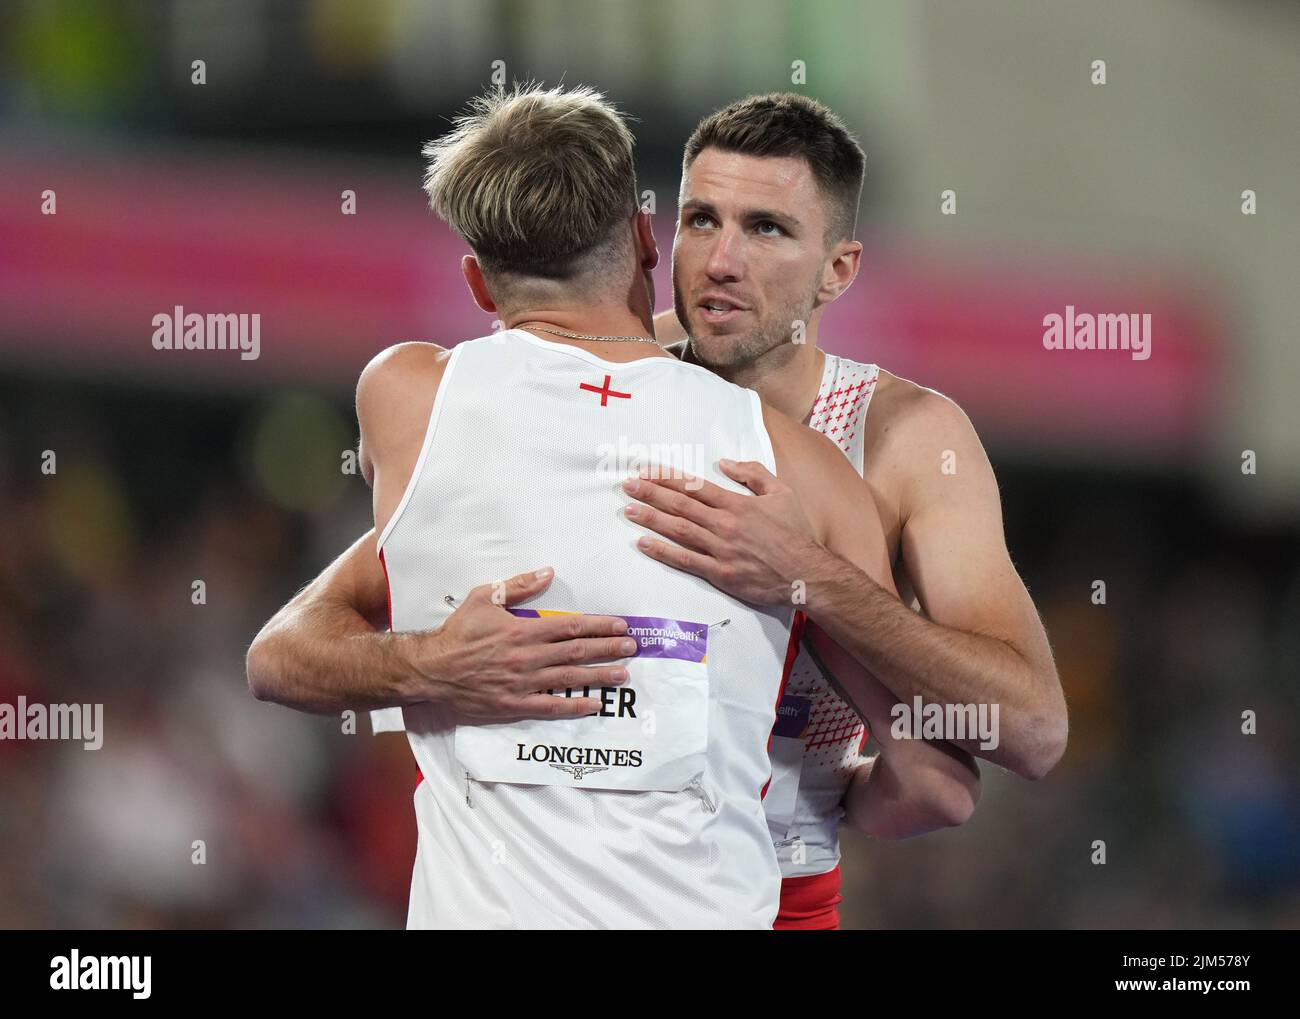 England's Andrew Pozzi (right) who won bronze is embraced by compatriot Joshua Zeller, who finished fourth after the Men's 110m Hurdles Final at Alexander Stadium on day seven of the 2022 Commonwealth Games in Birmingham. Picture date: Thursday August 4, 2022. Stock Photo